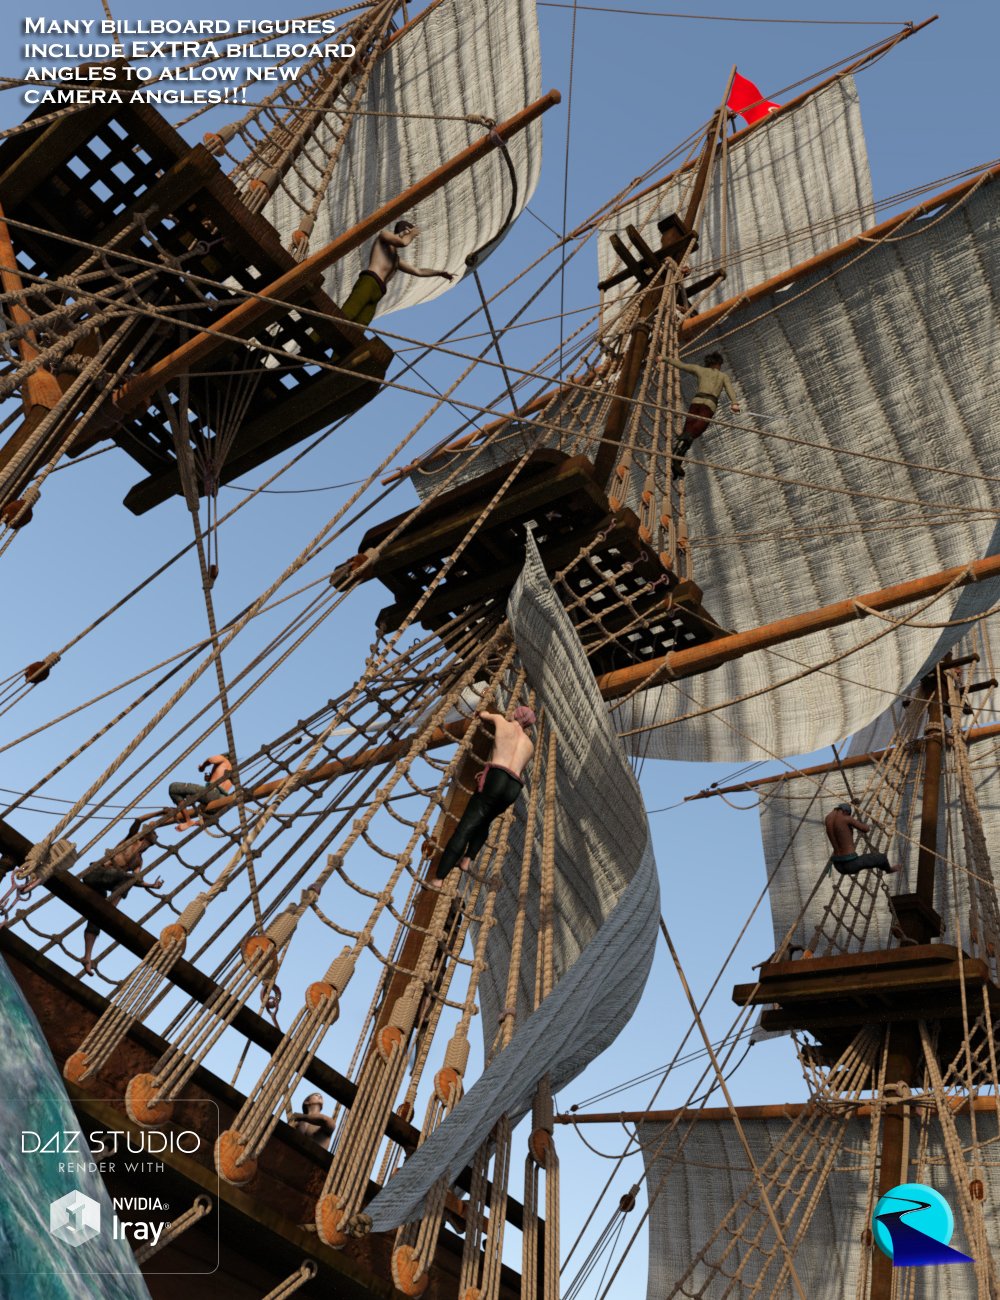 Now-Crowd Billboards - Sailing the Seven Seas by: RiverSoft Art, 3D Models by Daz 3D